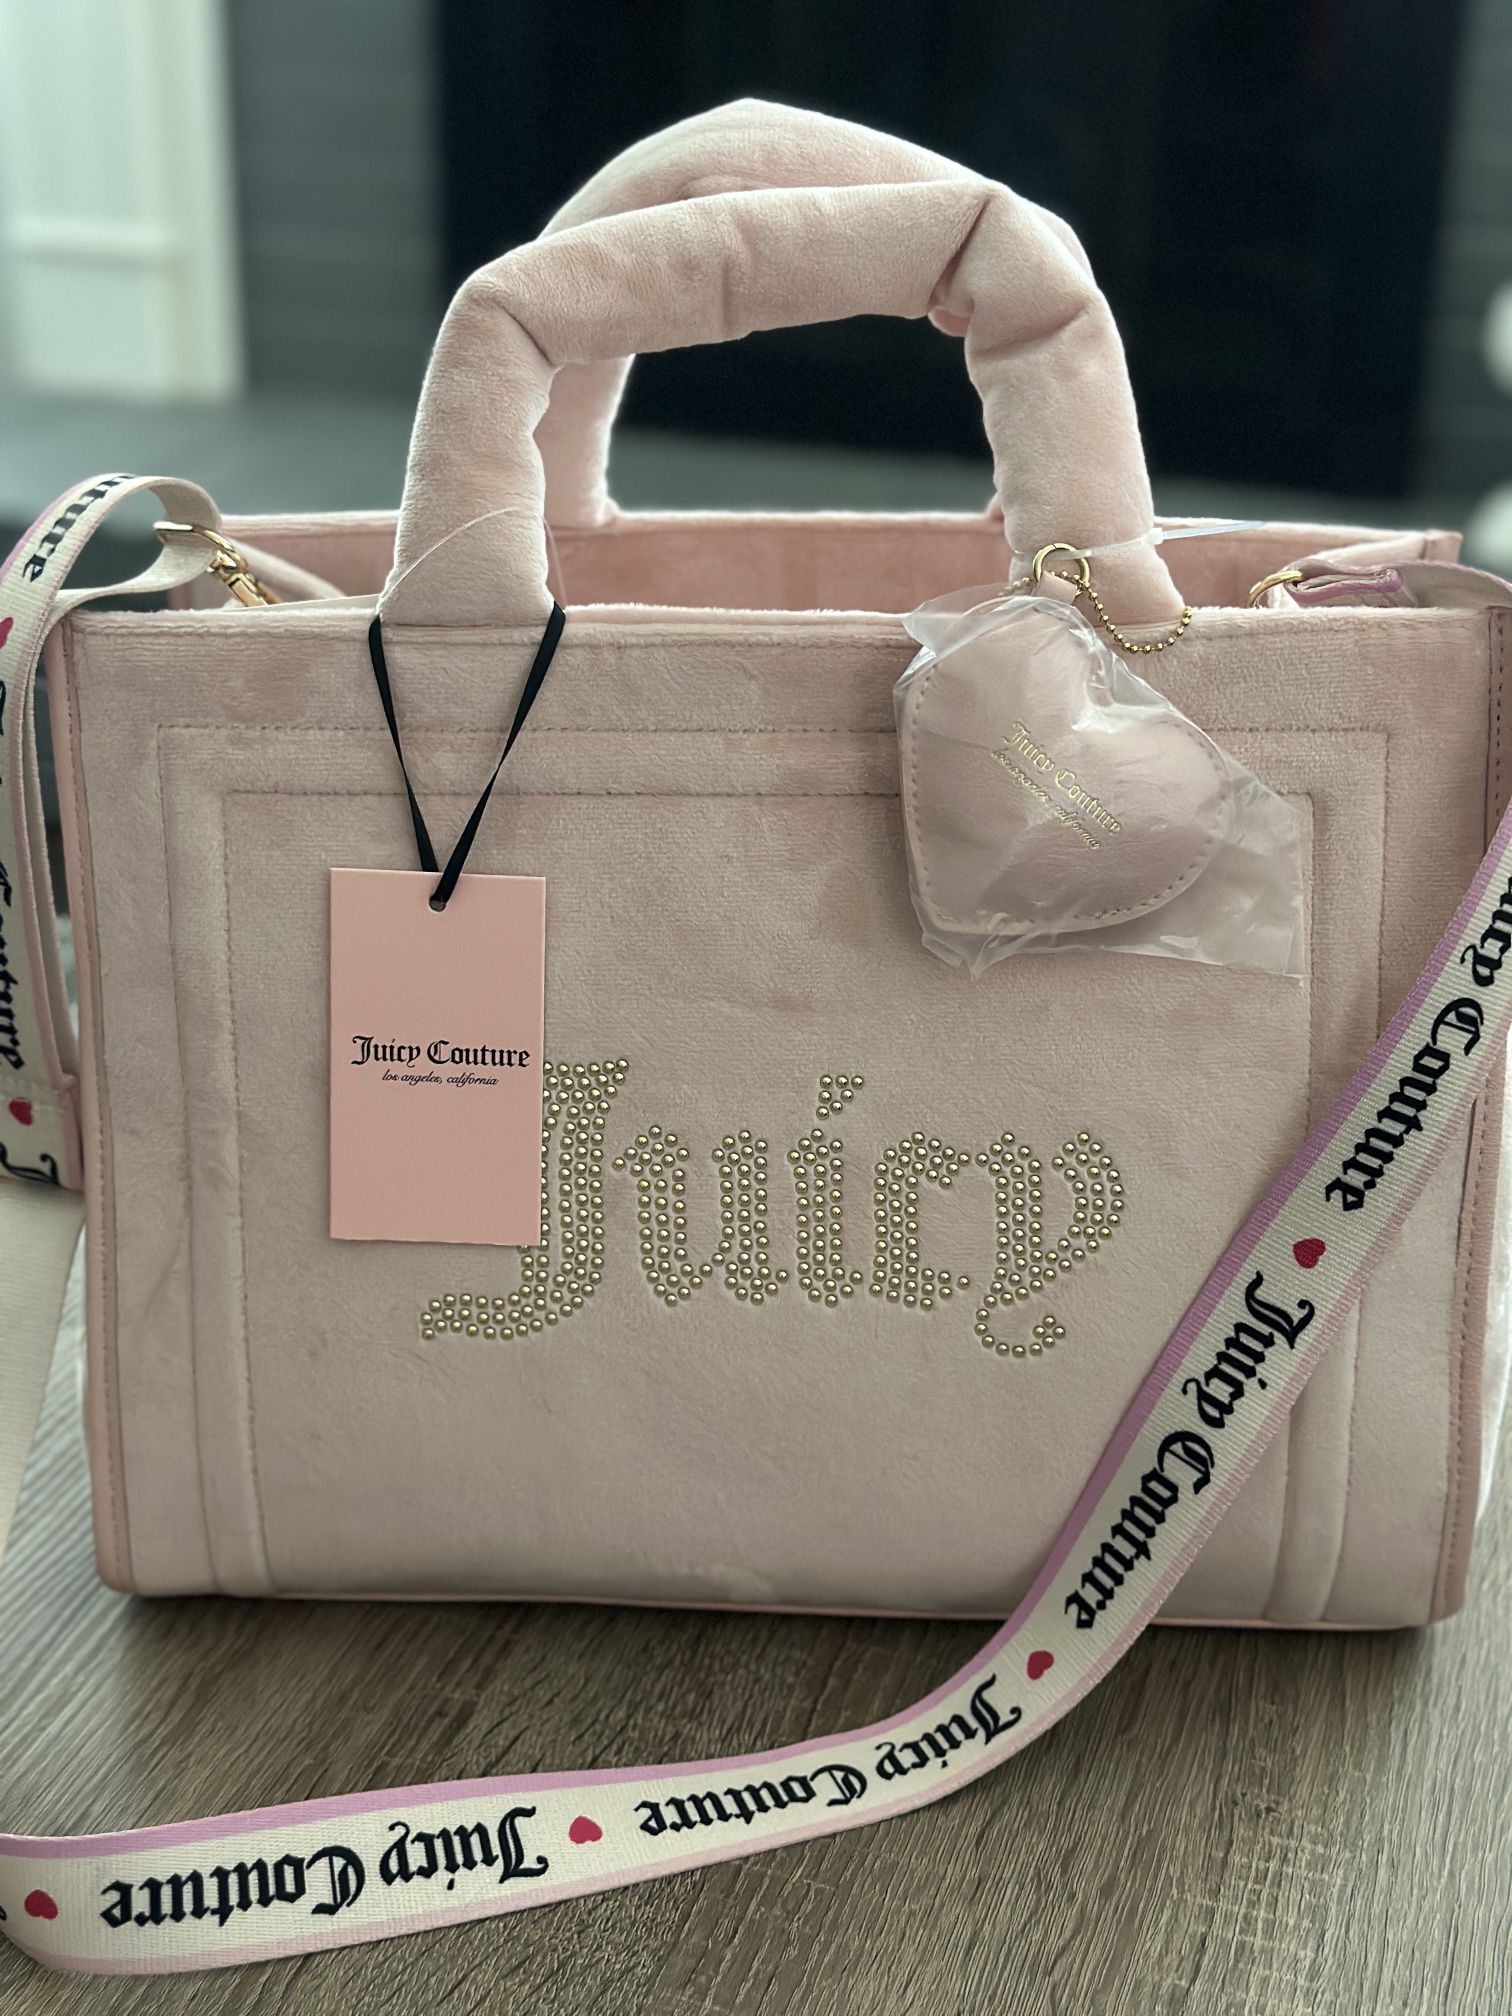 Juicy Couture Extra Spender Velour Tote Bag Purse Viral 